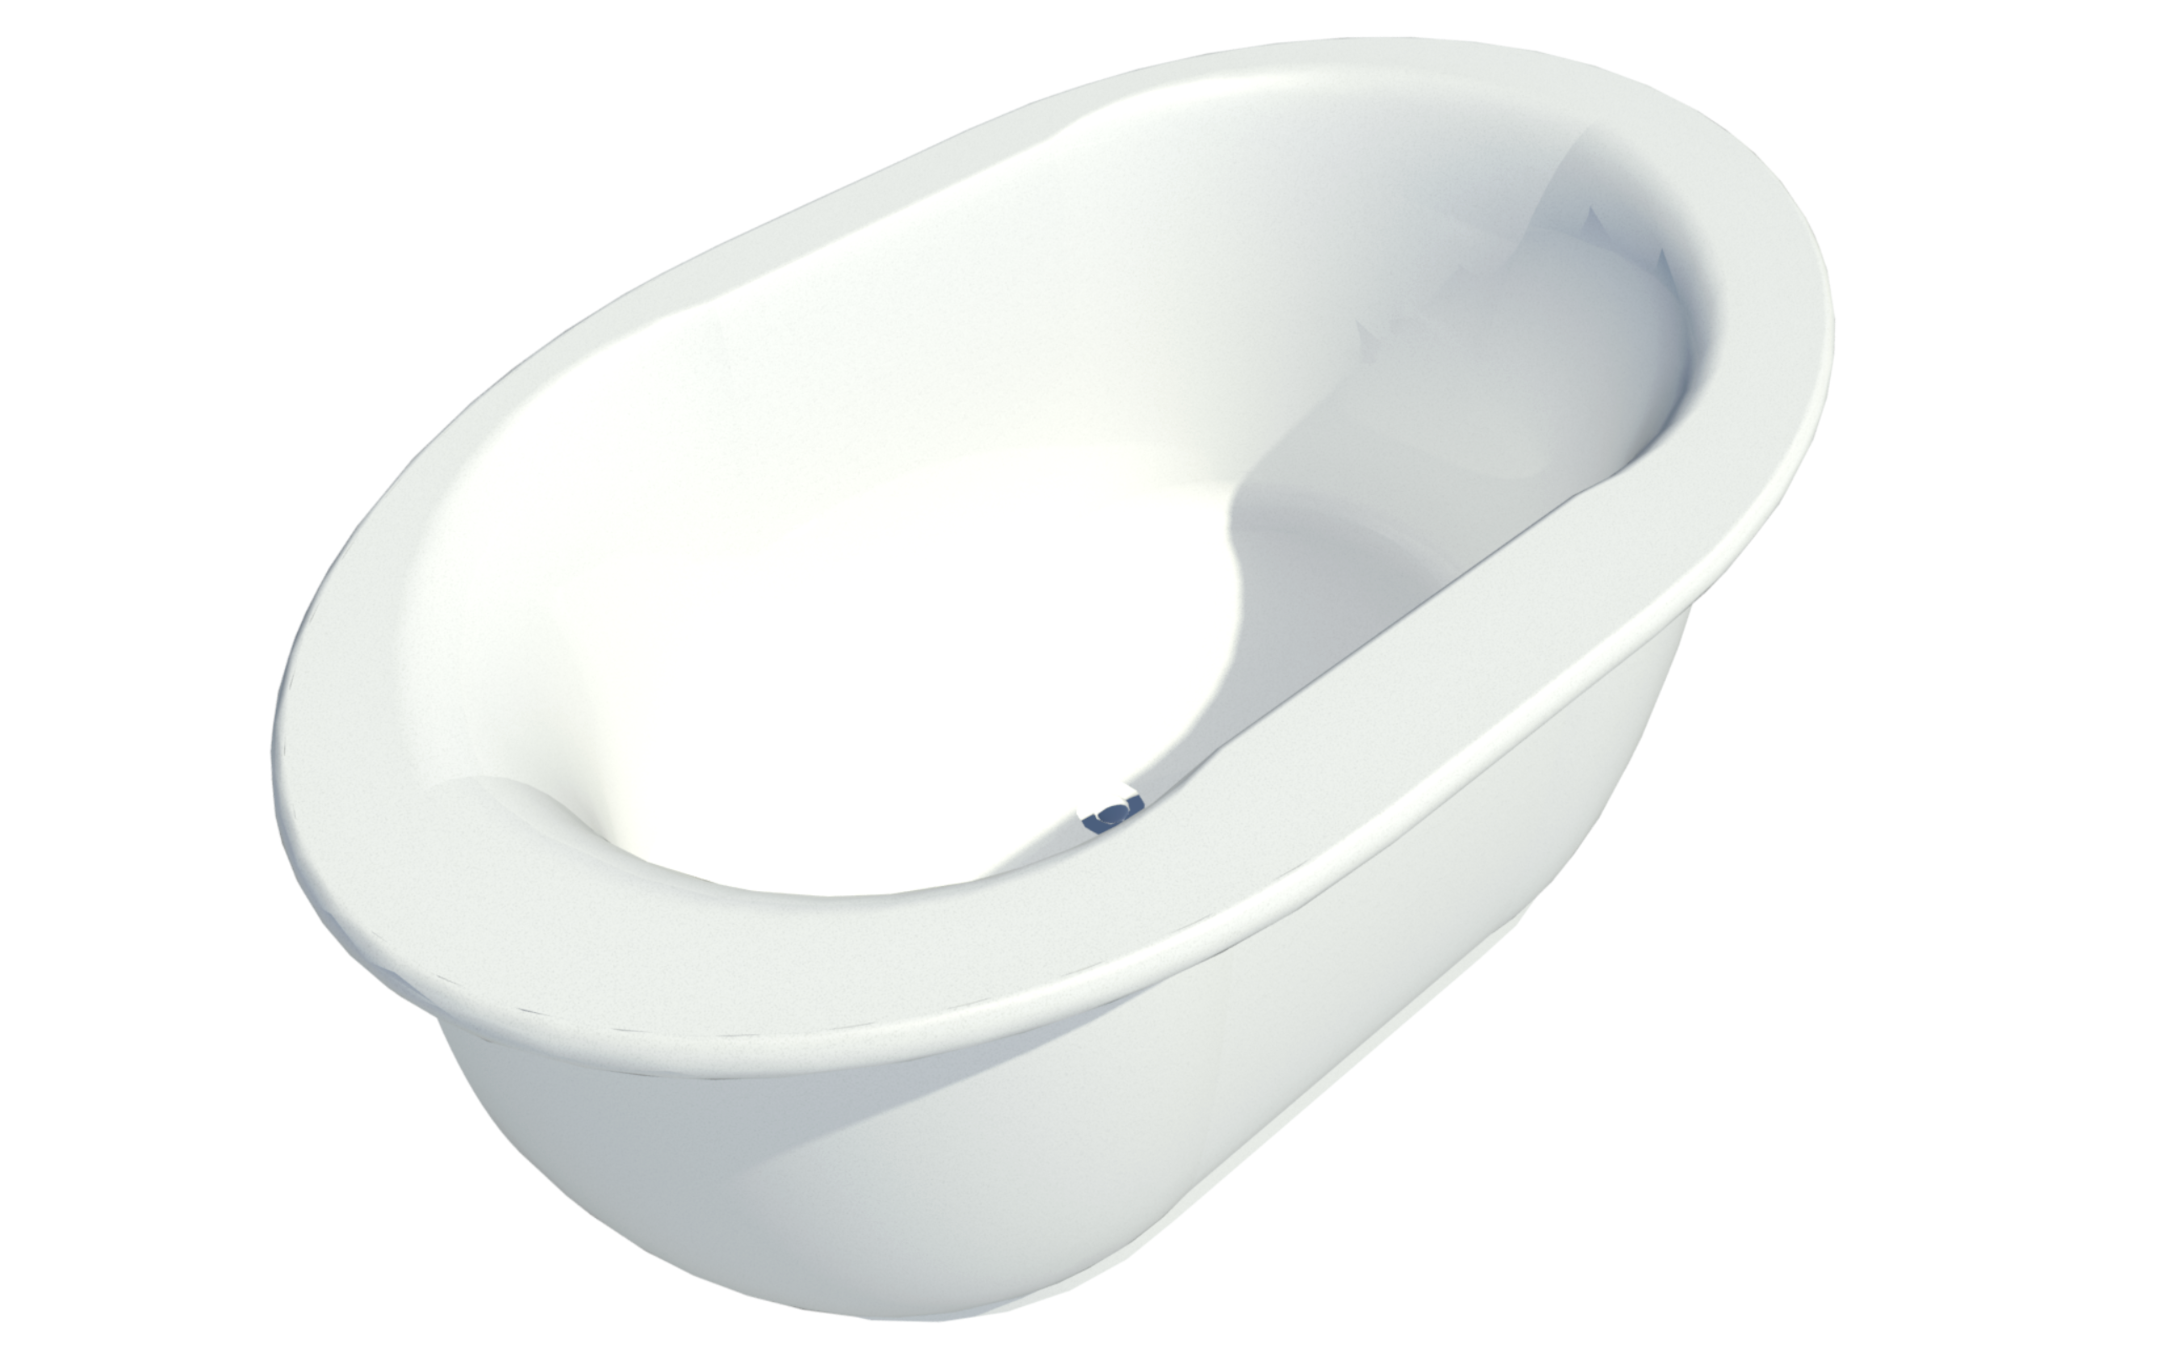 Revir raytrace showing the Ellesmere free-standing bathtub. It comes in a white finish, is oval in shape and has smooth curves on the edges.